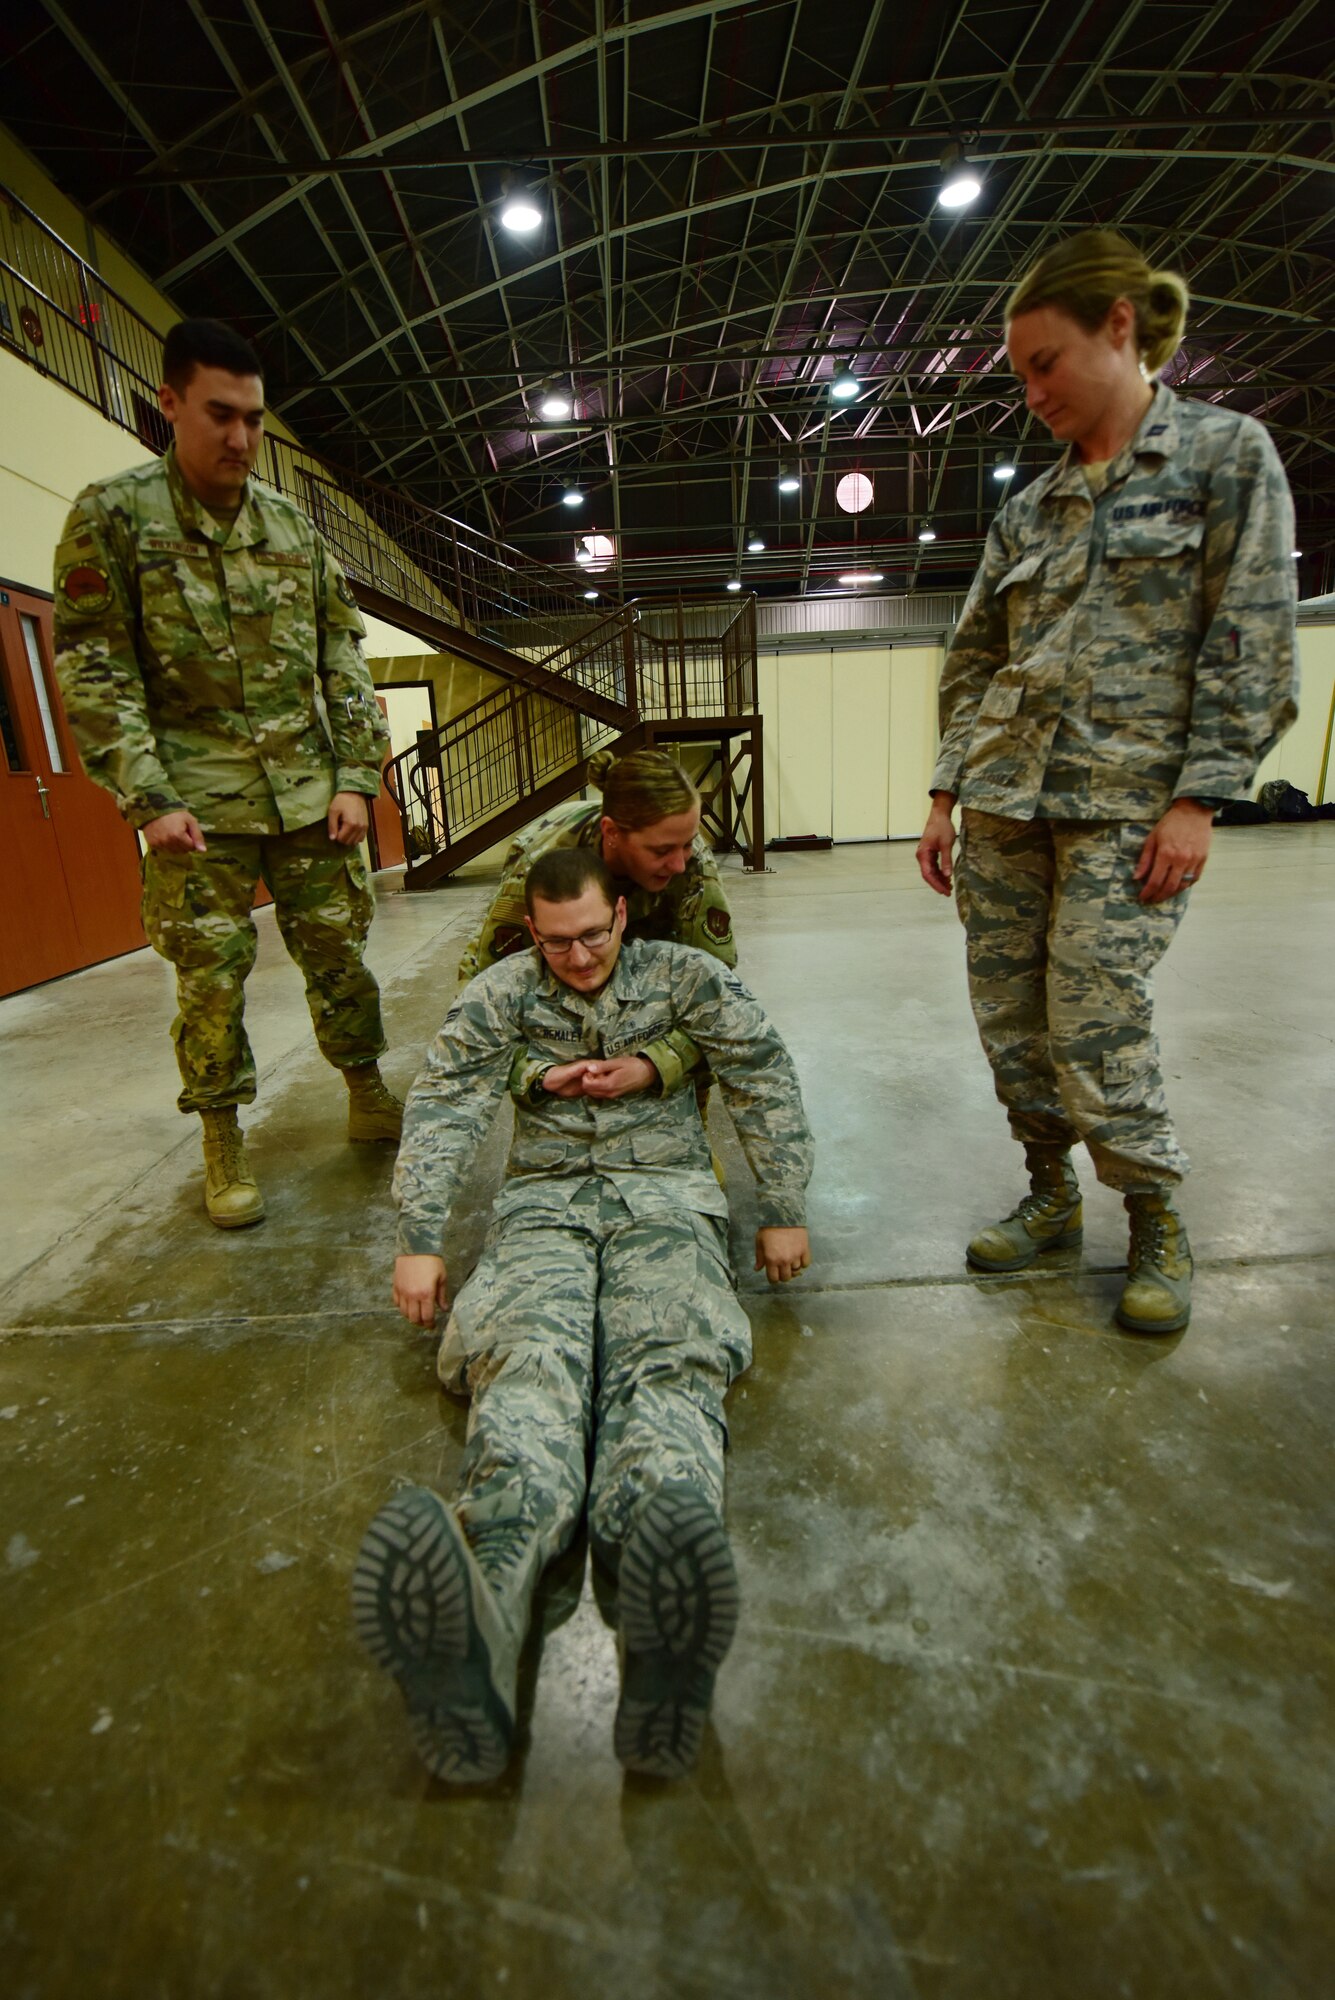 Staff Sgt. Haillie Luebke, Self-Aid Buddy Care advisor, trains Airmen on fore-and-aft carries during Ability to Survive and Operate training May 24, 2019, at Incirlik Air Base, Turkey. The fore-and-aft carry can be used to transport conscious or unconscious casualties to safety. (U.S. Air Force photo by Tech. Sgt. Jim Araos)